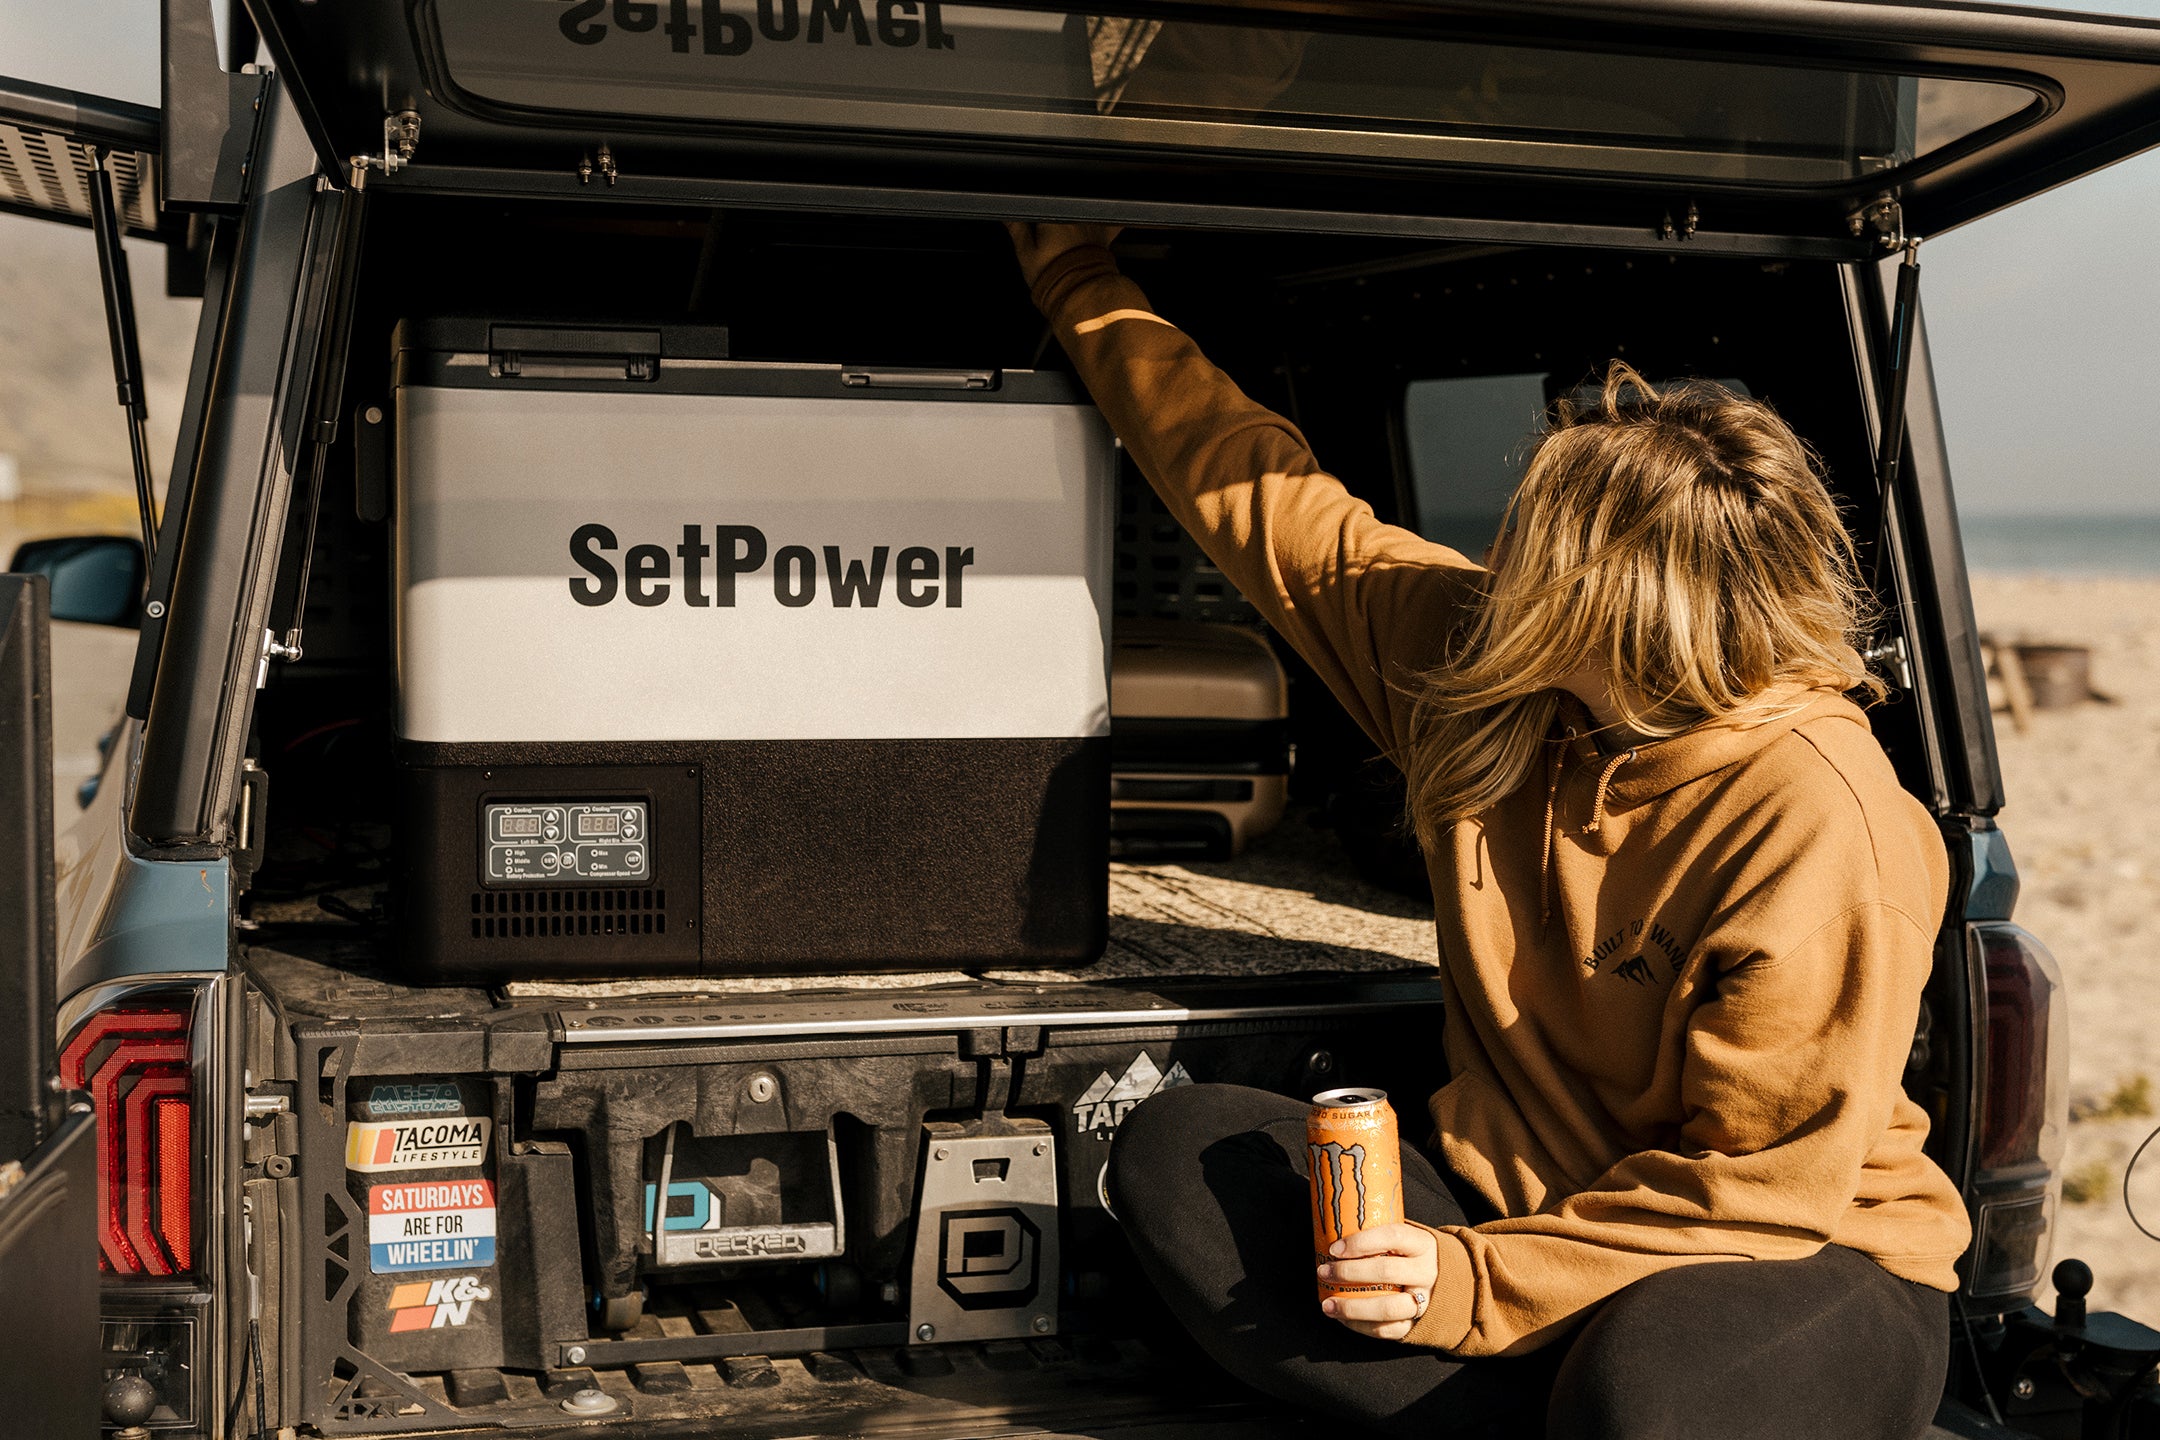 How To Use SetPower Portable Fridge The Right Way: 4 Efficient Tips